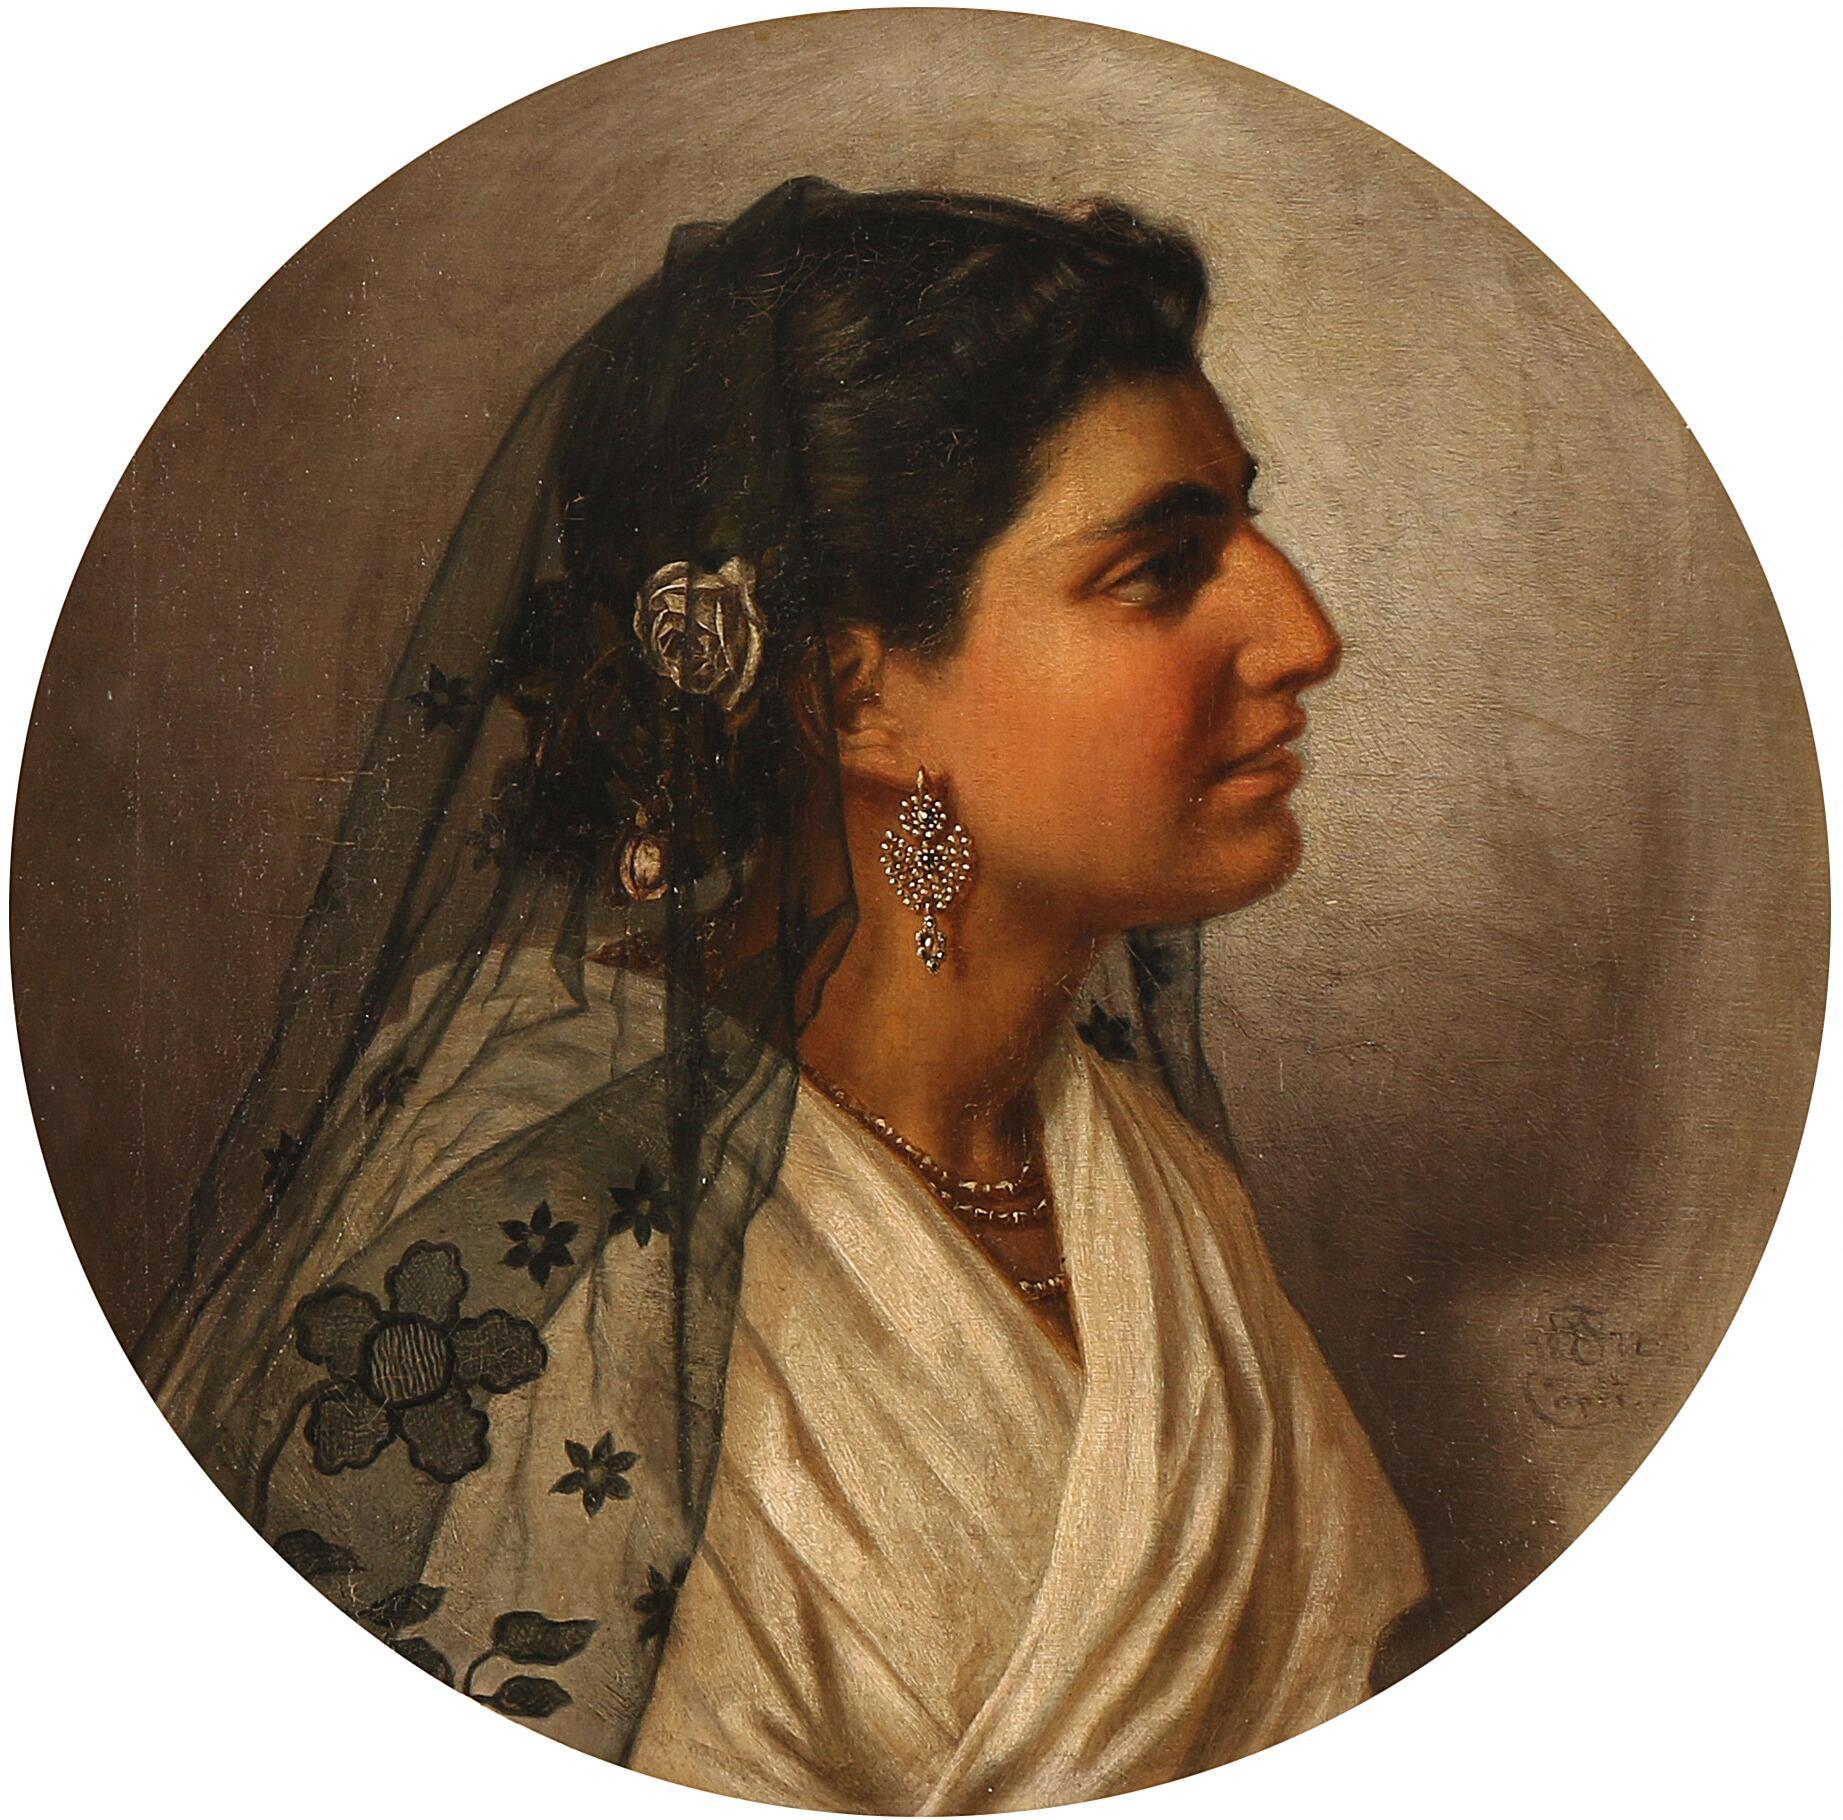 Wenzel Tornøe: Portrait of an Italian woman. Signed with monogram and dated Capri 1872. Oil on canvas.